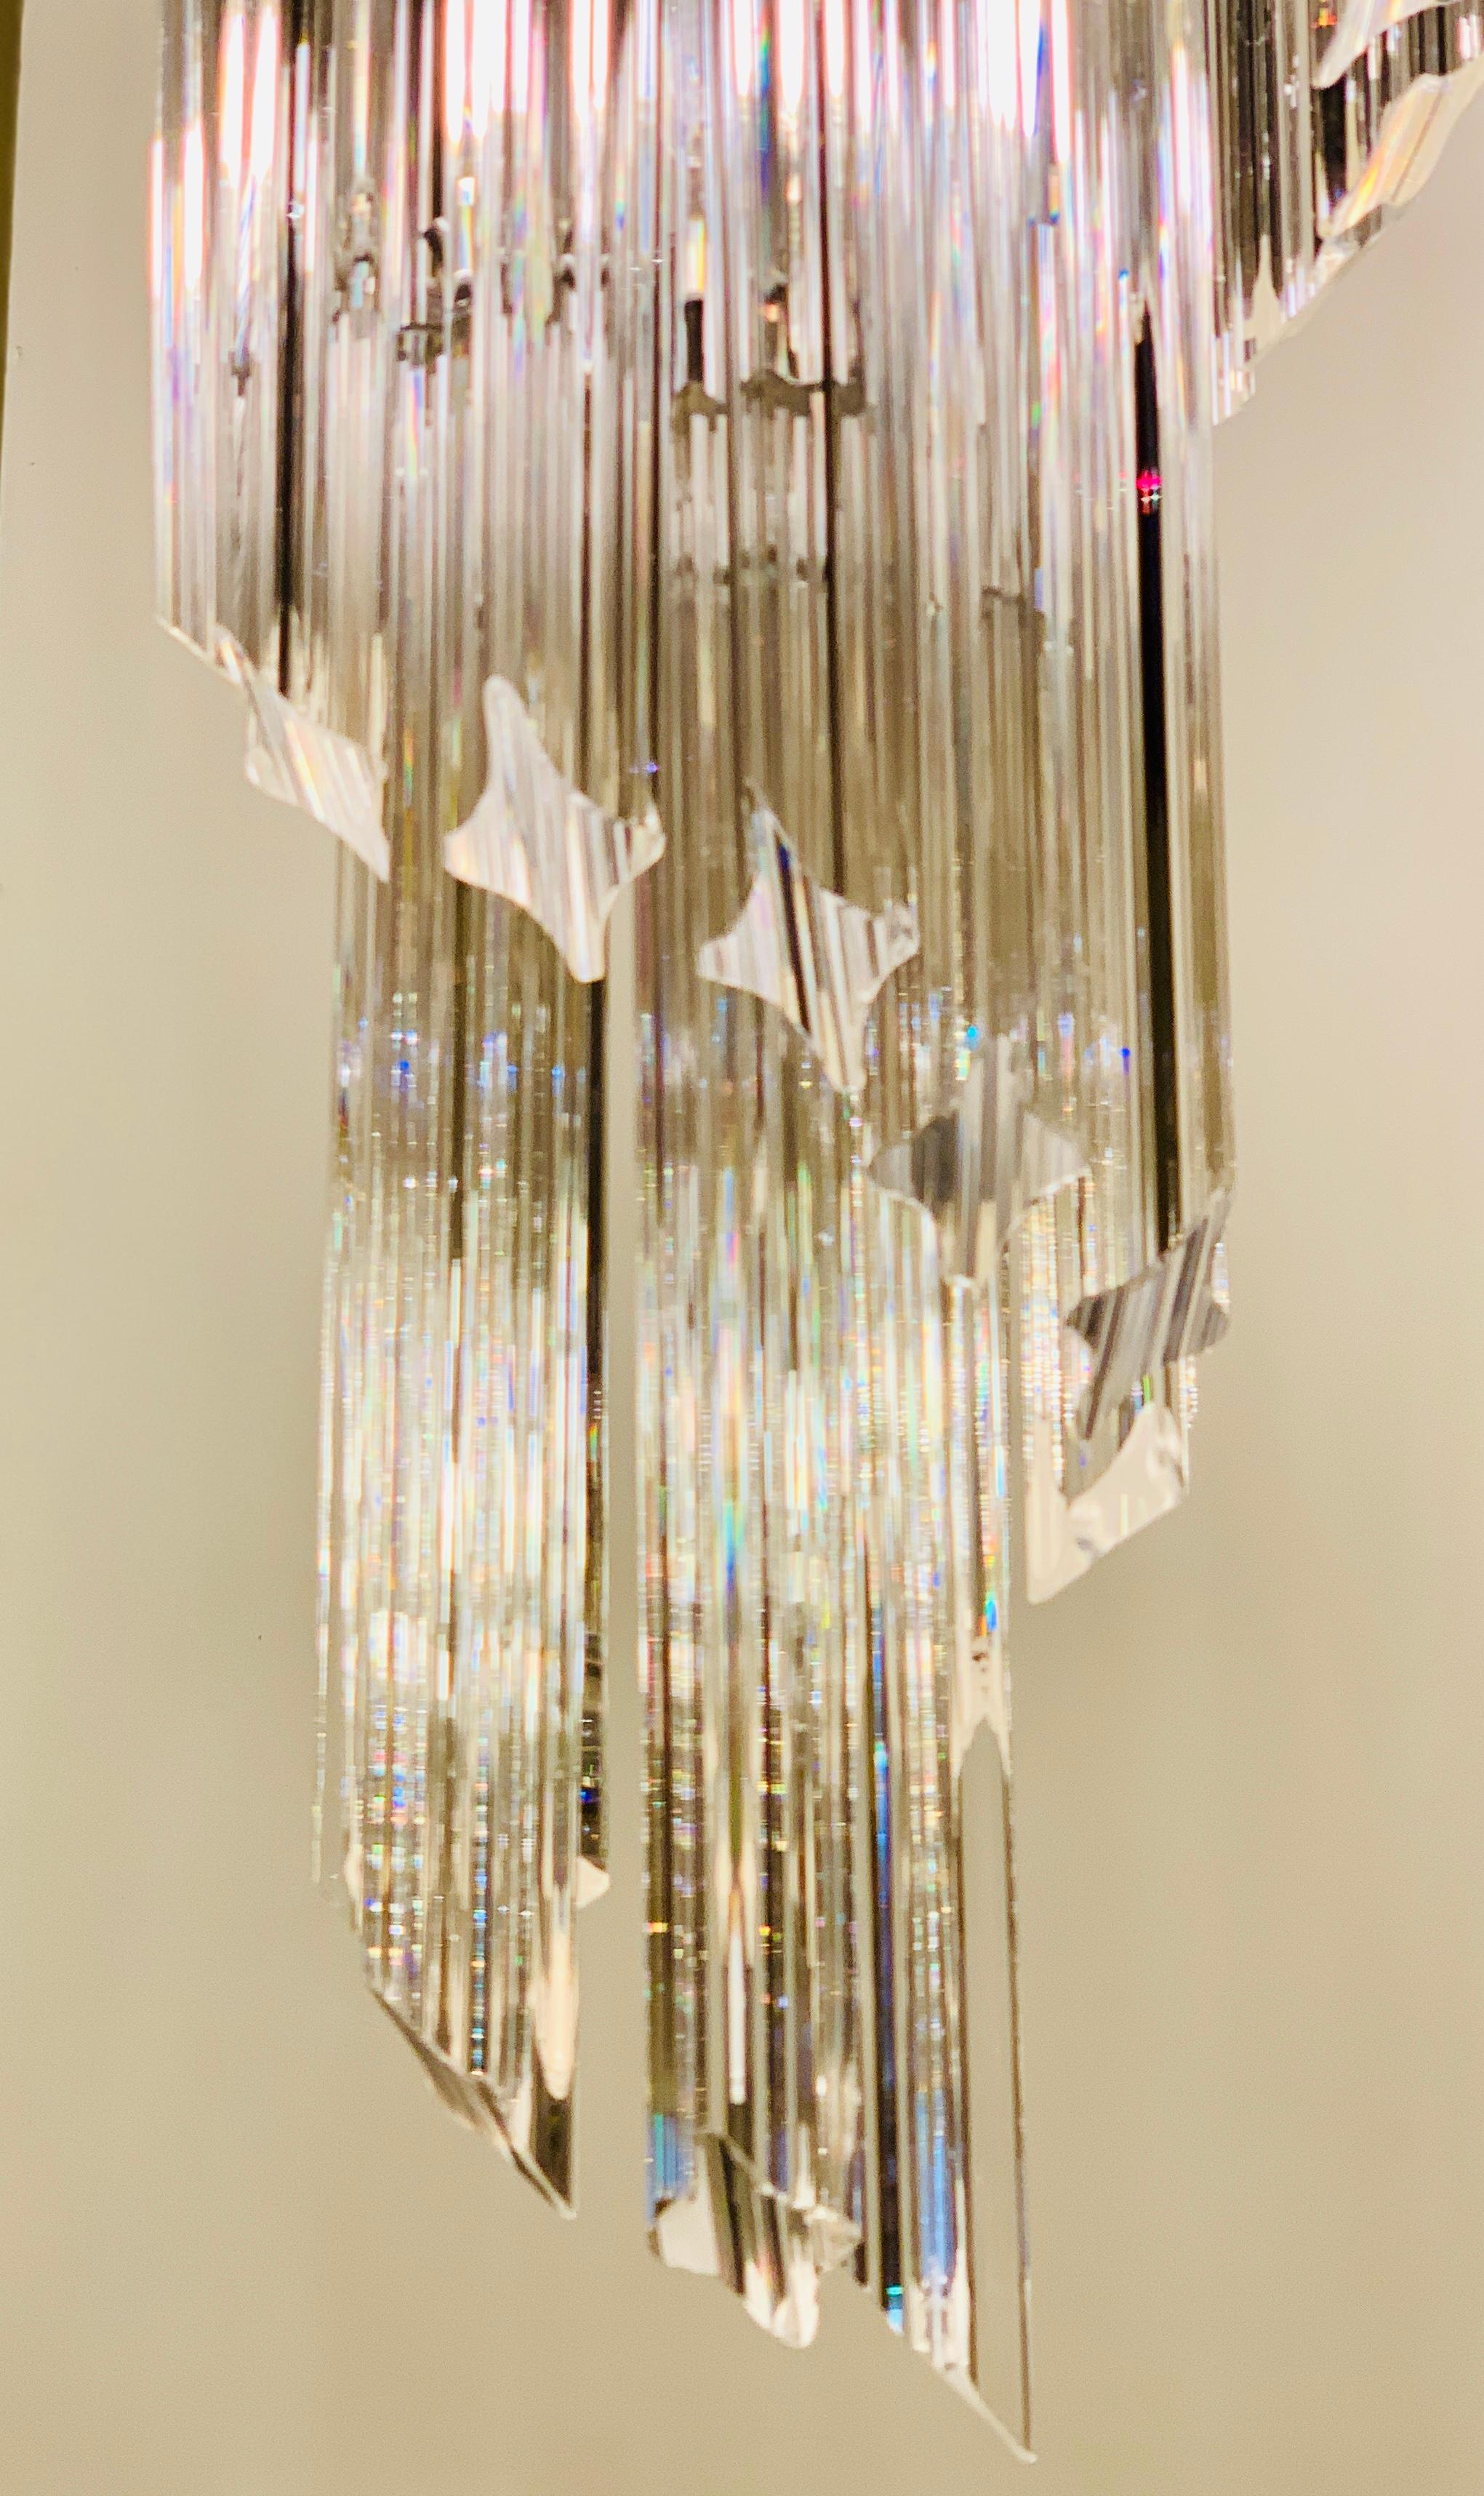 20th Century Glamorous Italian Midcentury Five-Tier Spiral Murano Glass Prism Chandelier For Sale